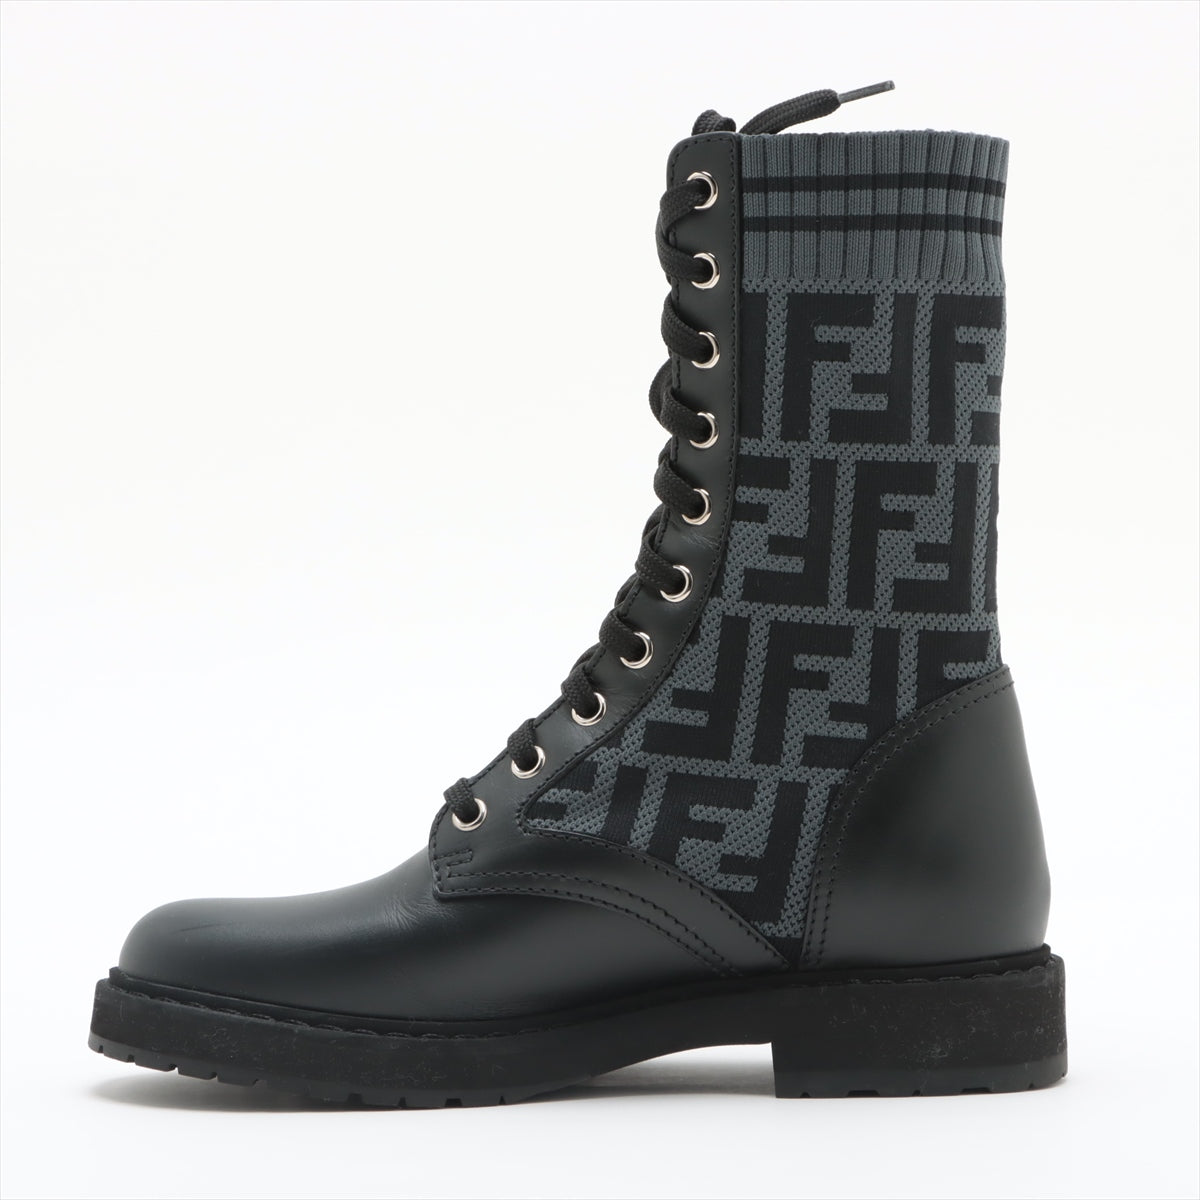 Fendi ZUCCa Knit × Leather Boots 35 Ladies' Black x Navy Lace up